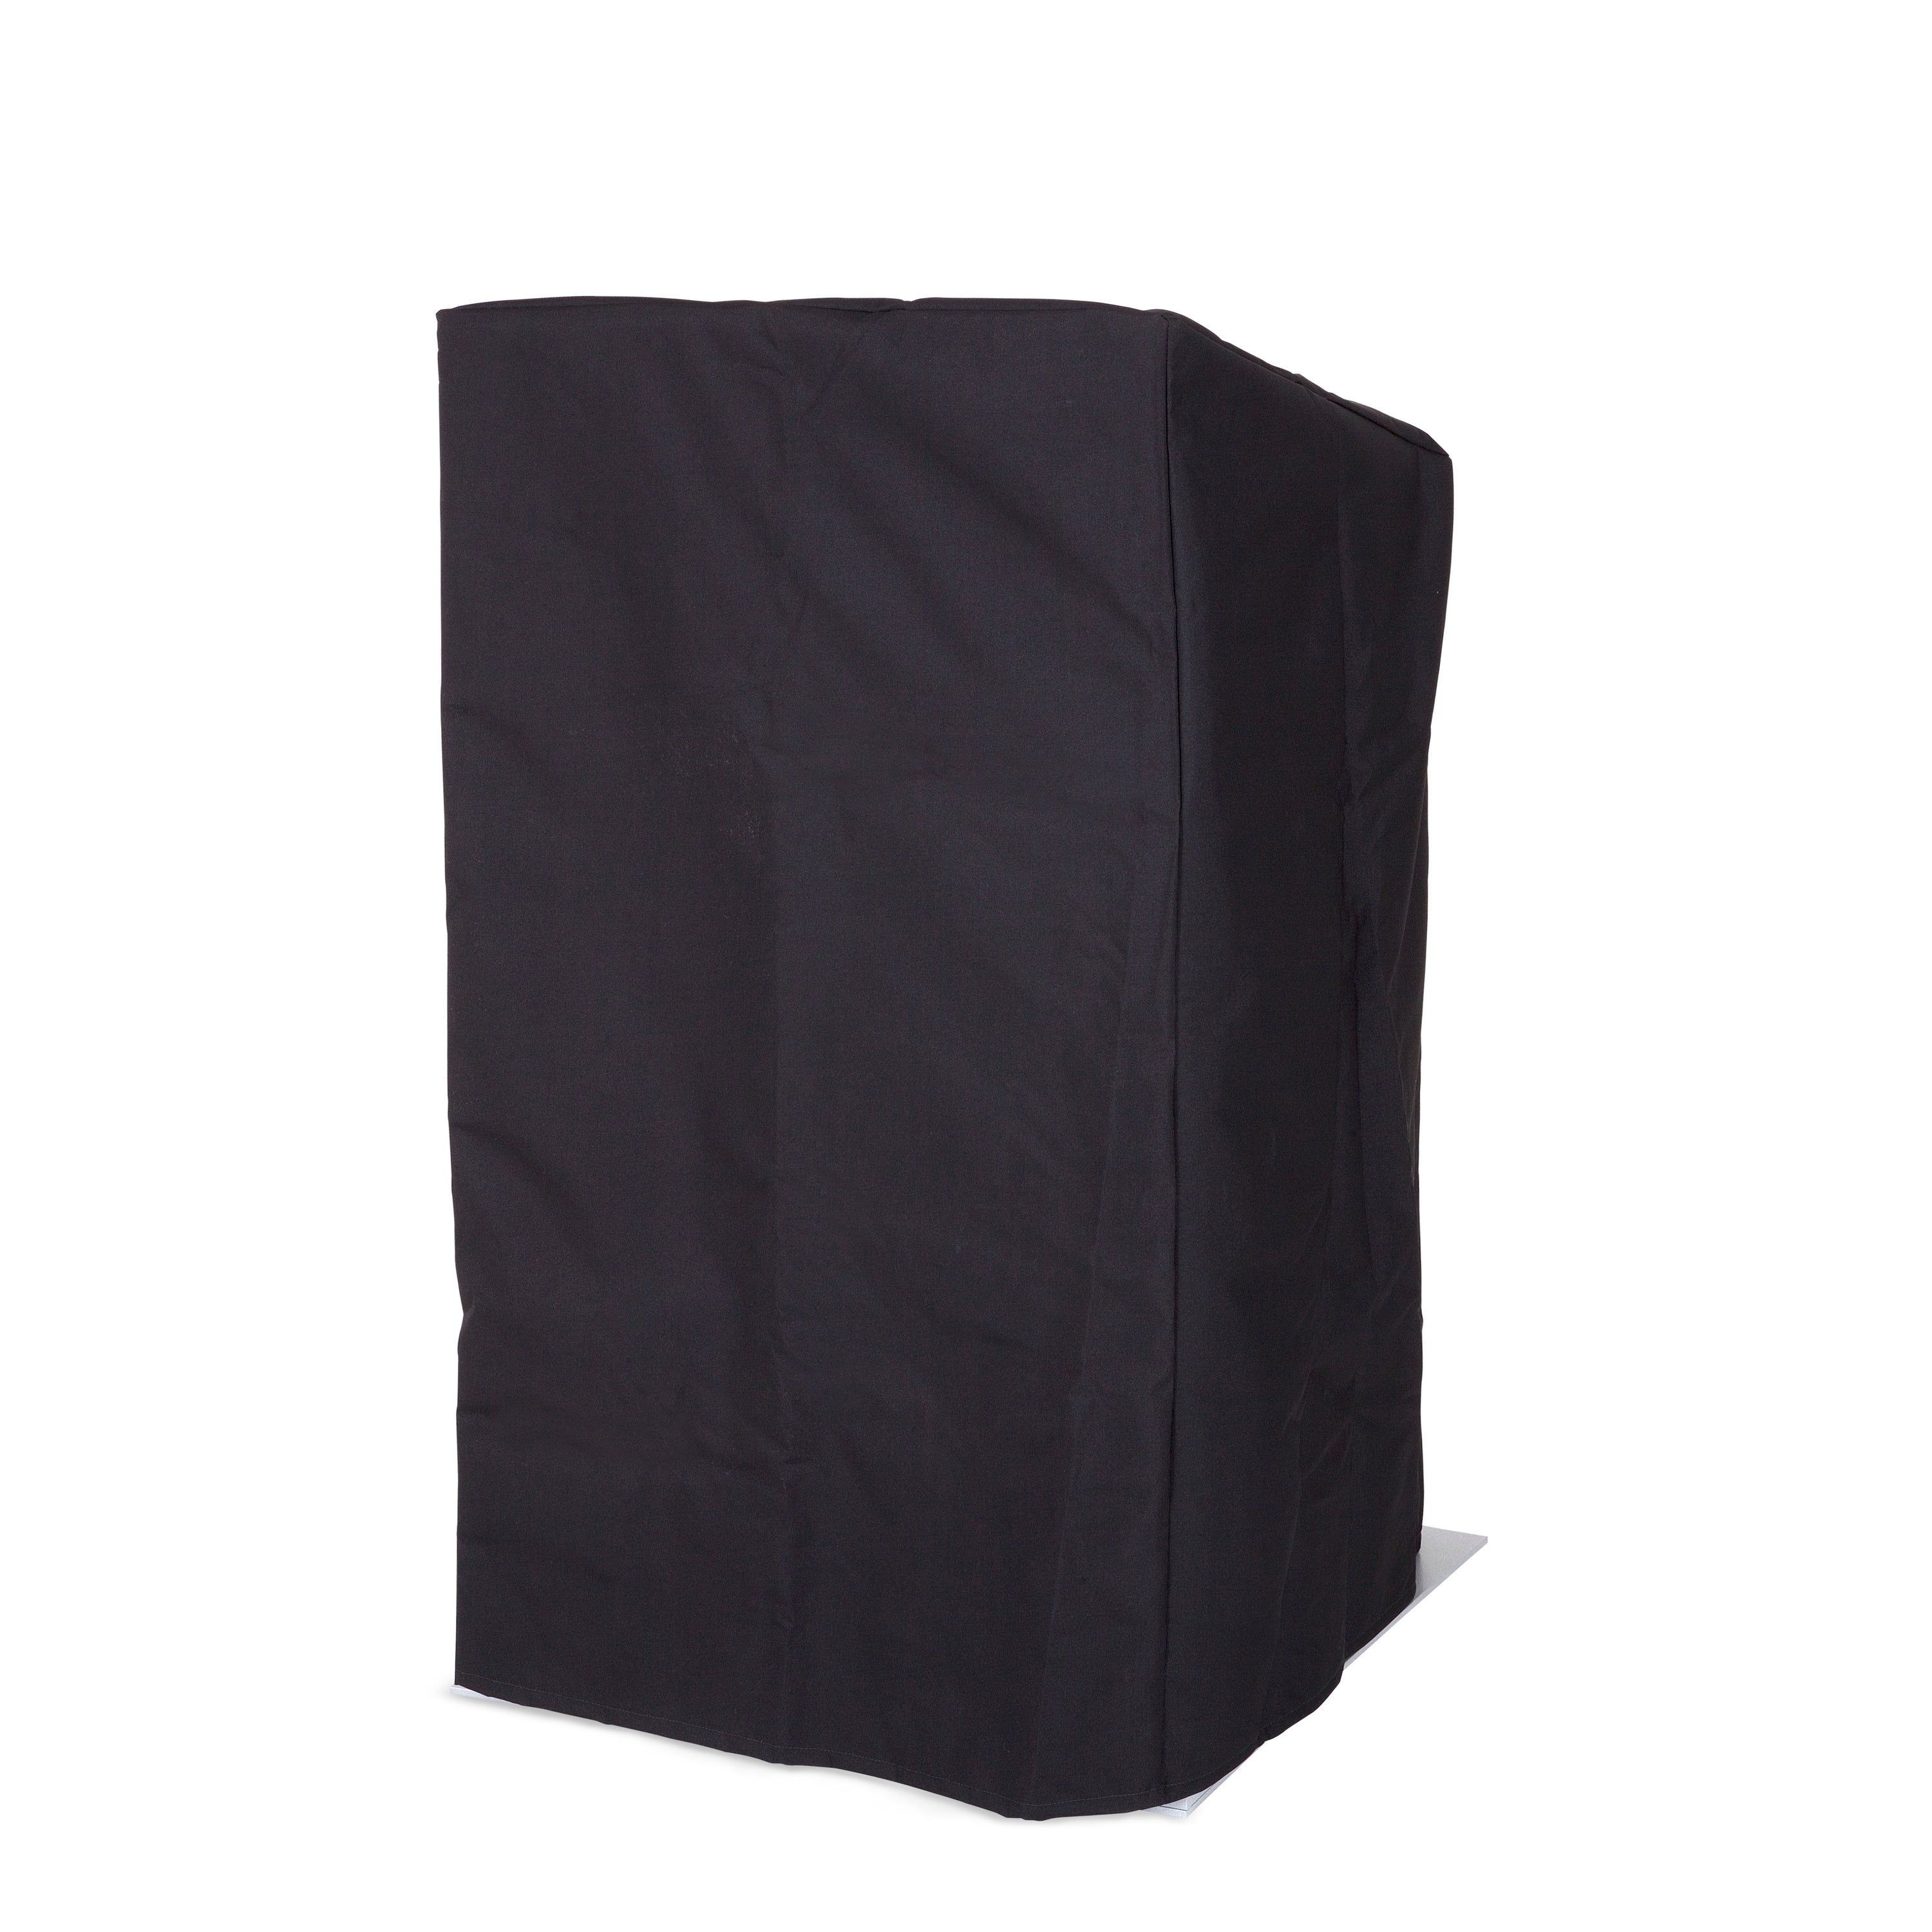 Urbann SIG F1 Dust Cover For Lecterns